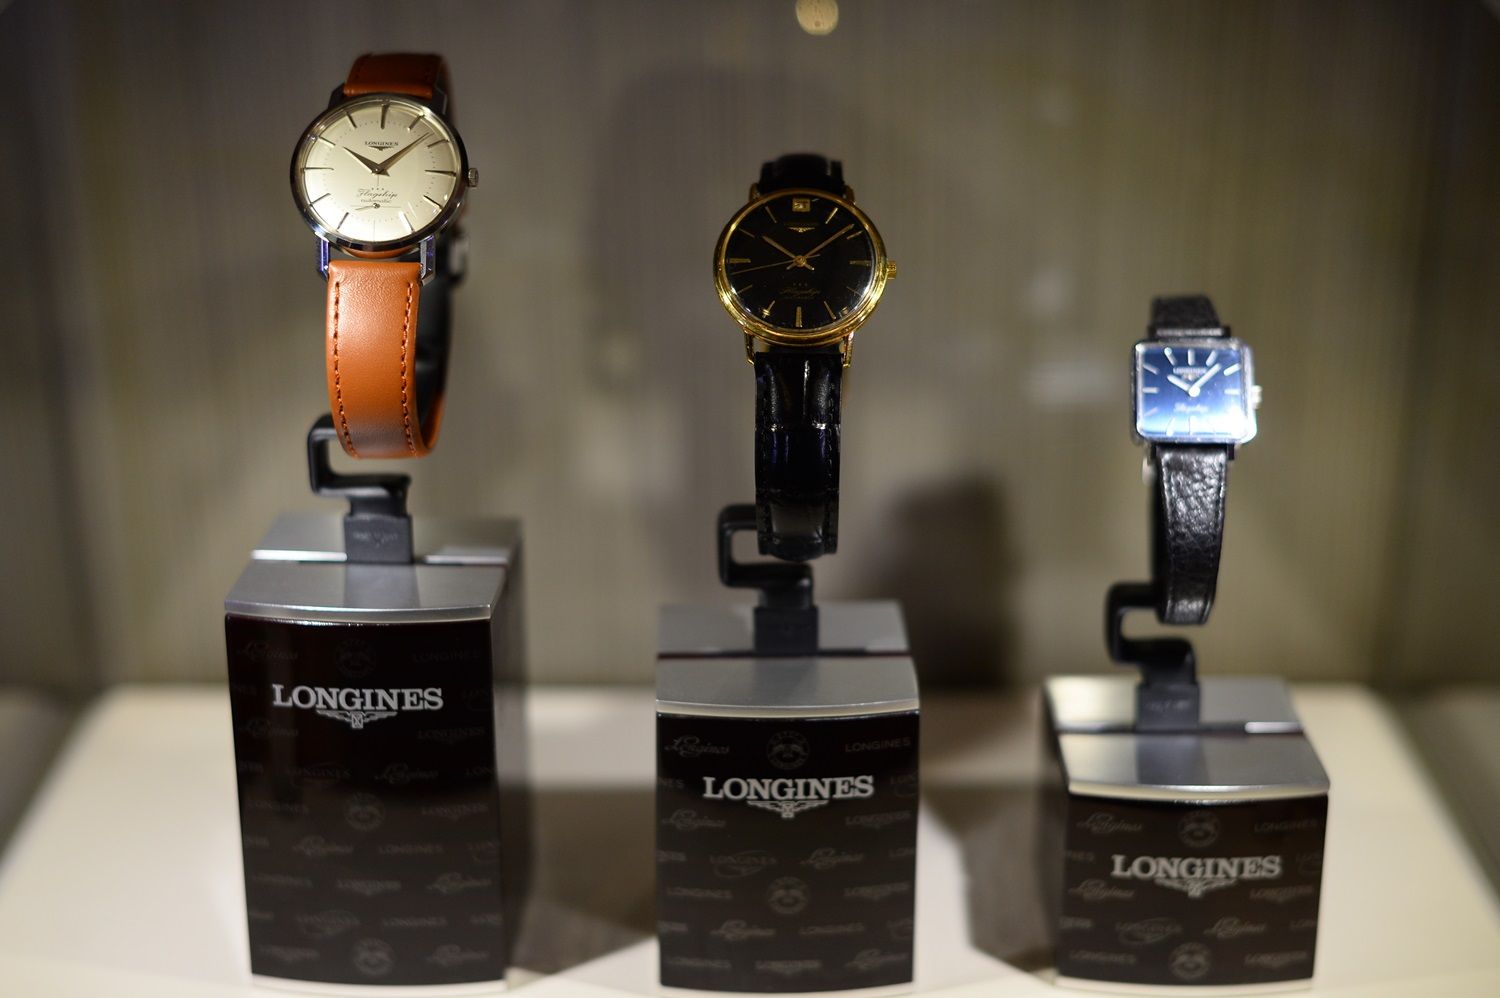 Longines’ 185th anniversary party